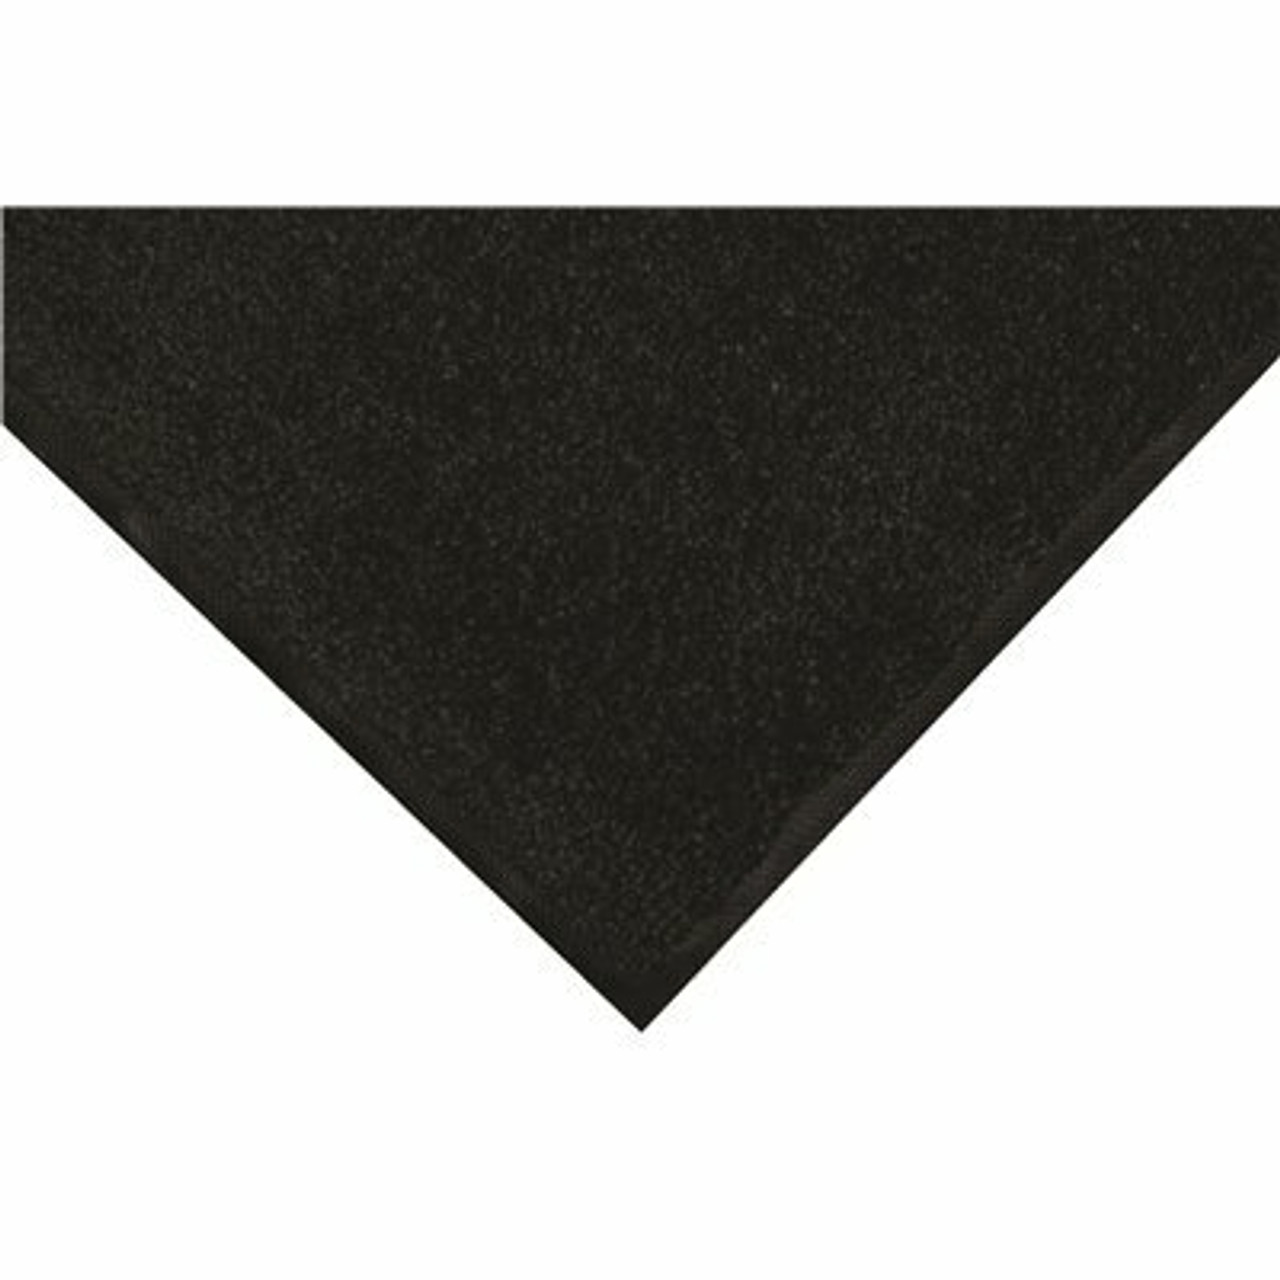 M+A Matting Colorstar Mat Solid Black 59 In. X 35 In. Pet Carpet Universal Cleated Backing Commercial Floor Mat